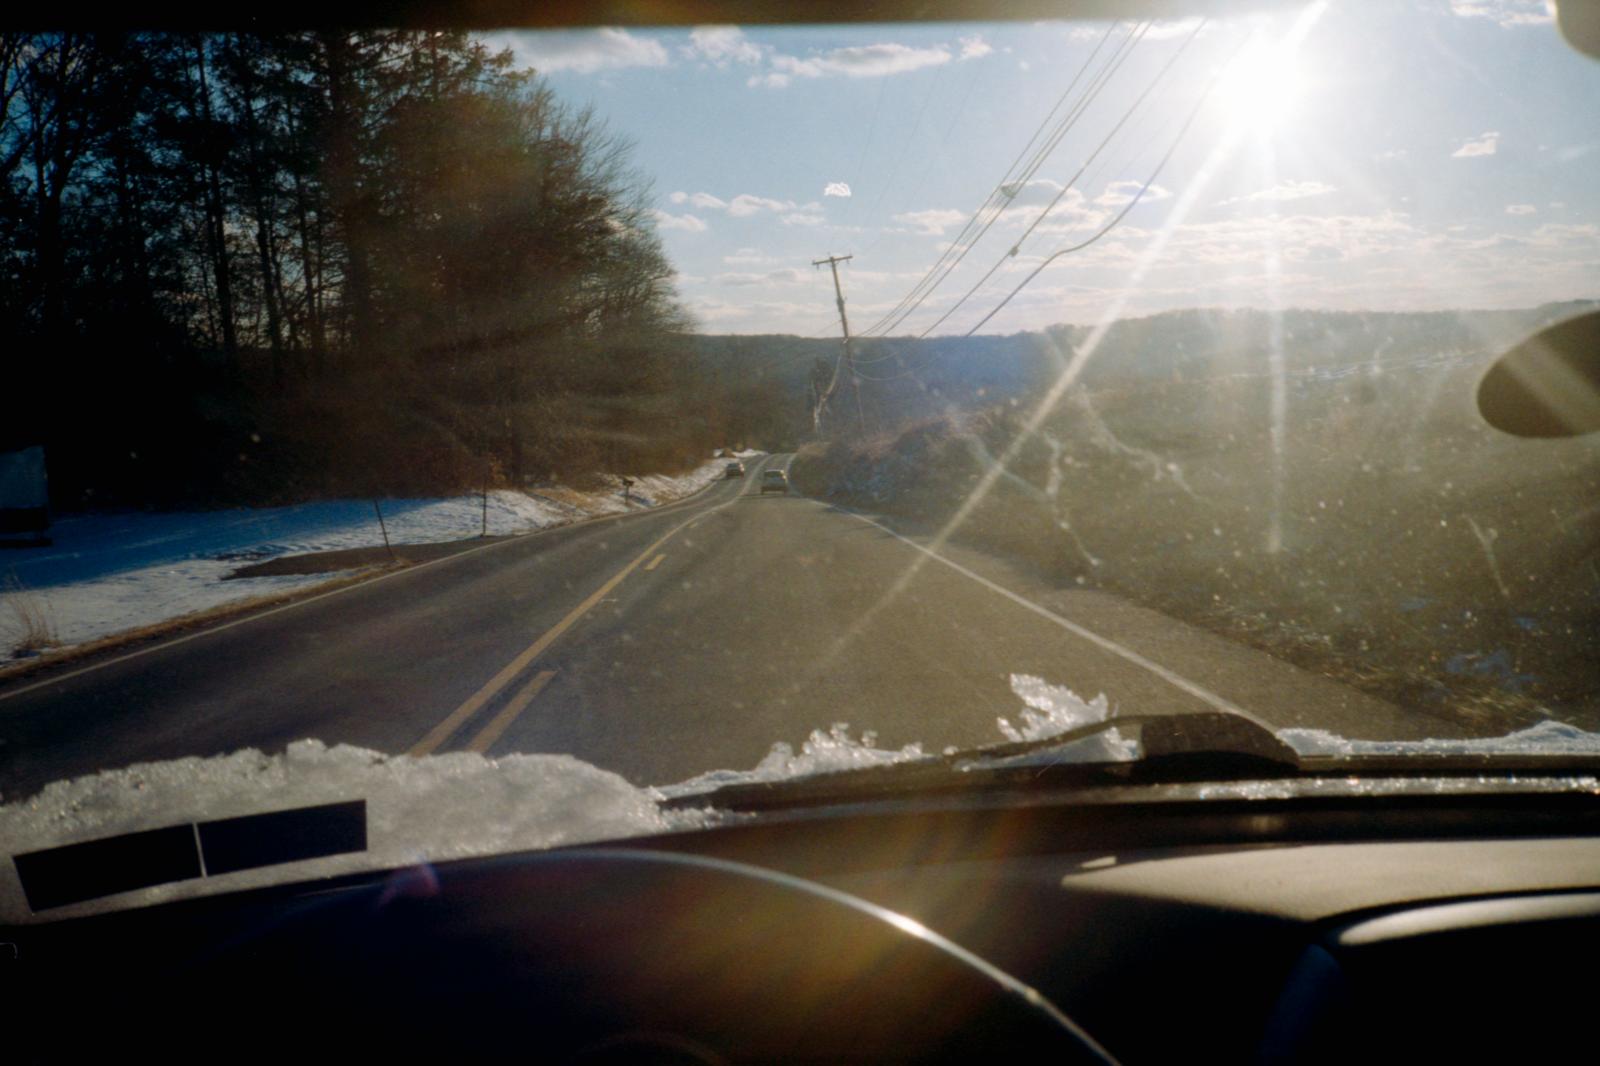 2022 / Snapshots - Driving back from New Jersey, February 2022